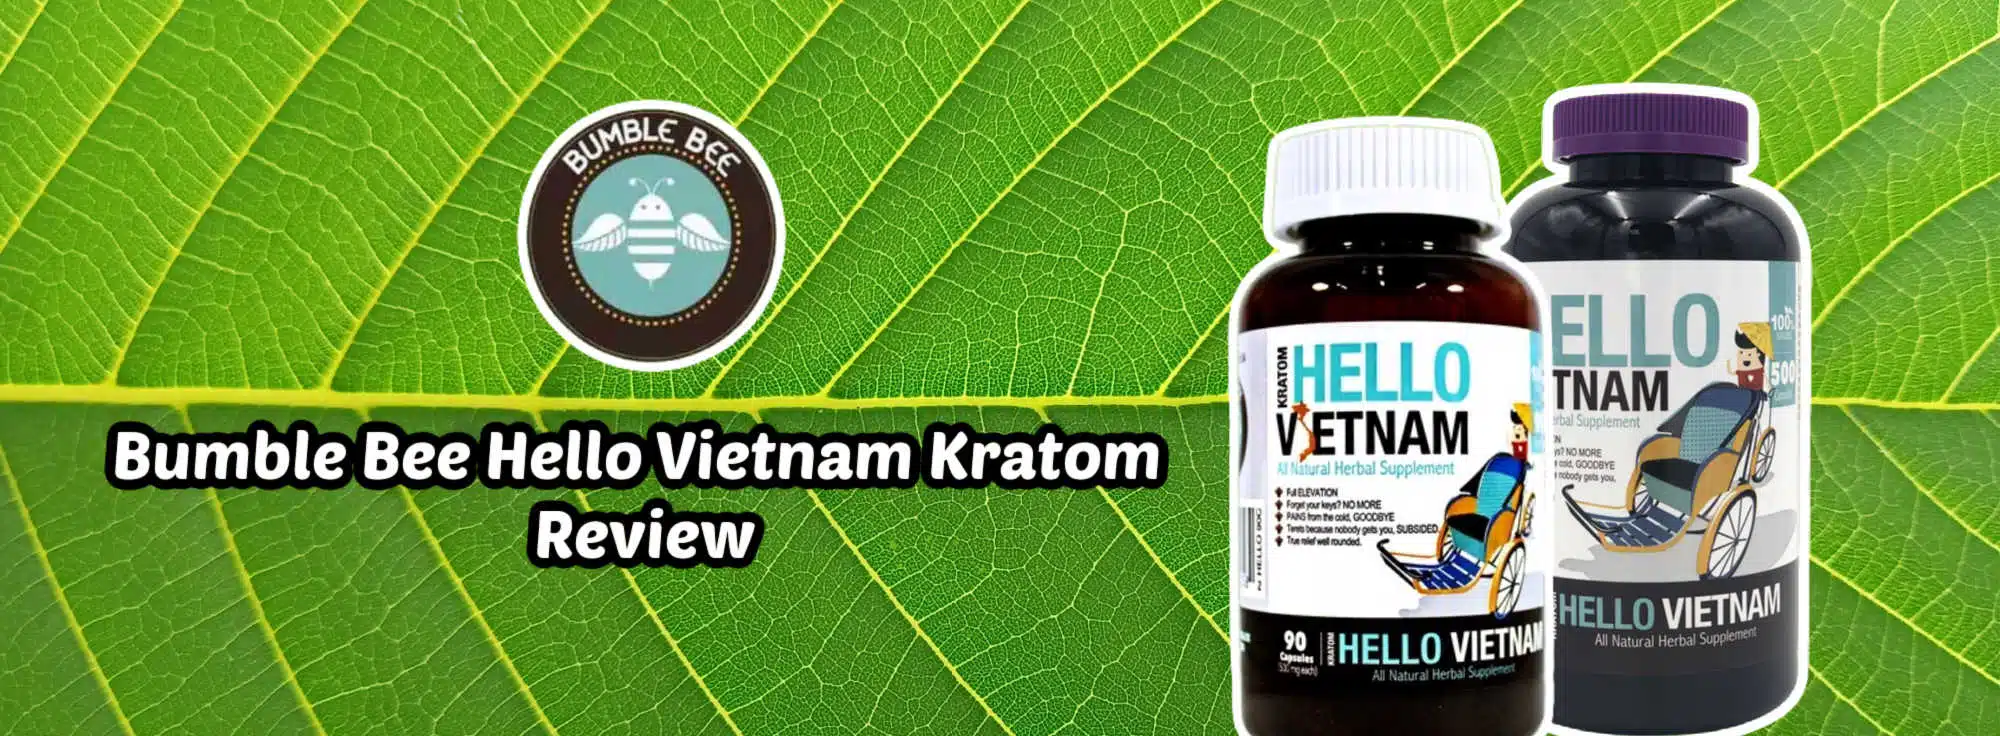 Bumble Bee Hello Vietnam Product Review – What You Need to Know